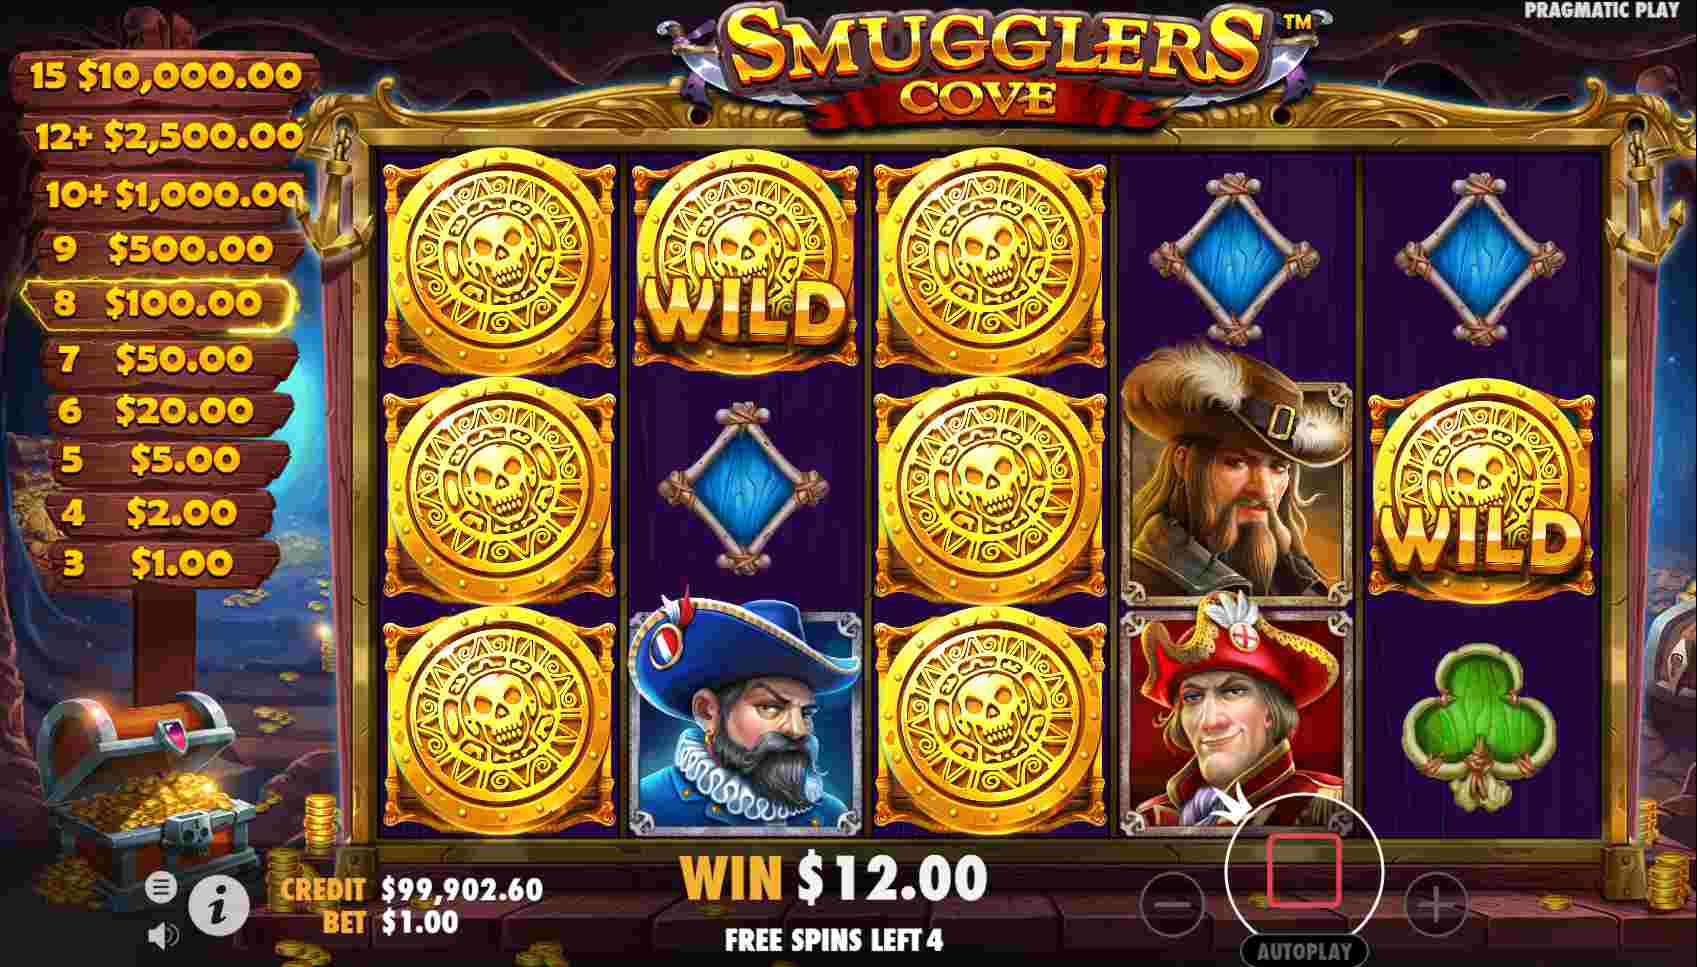 Smugglers Cove Free Spins